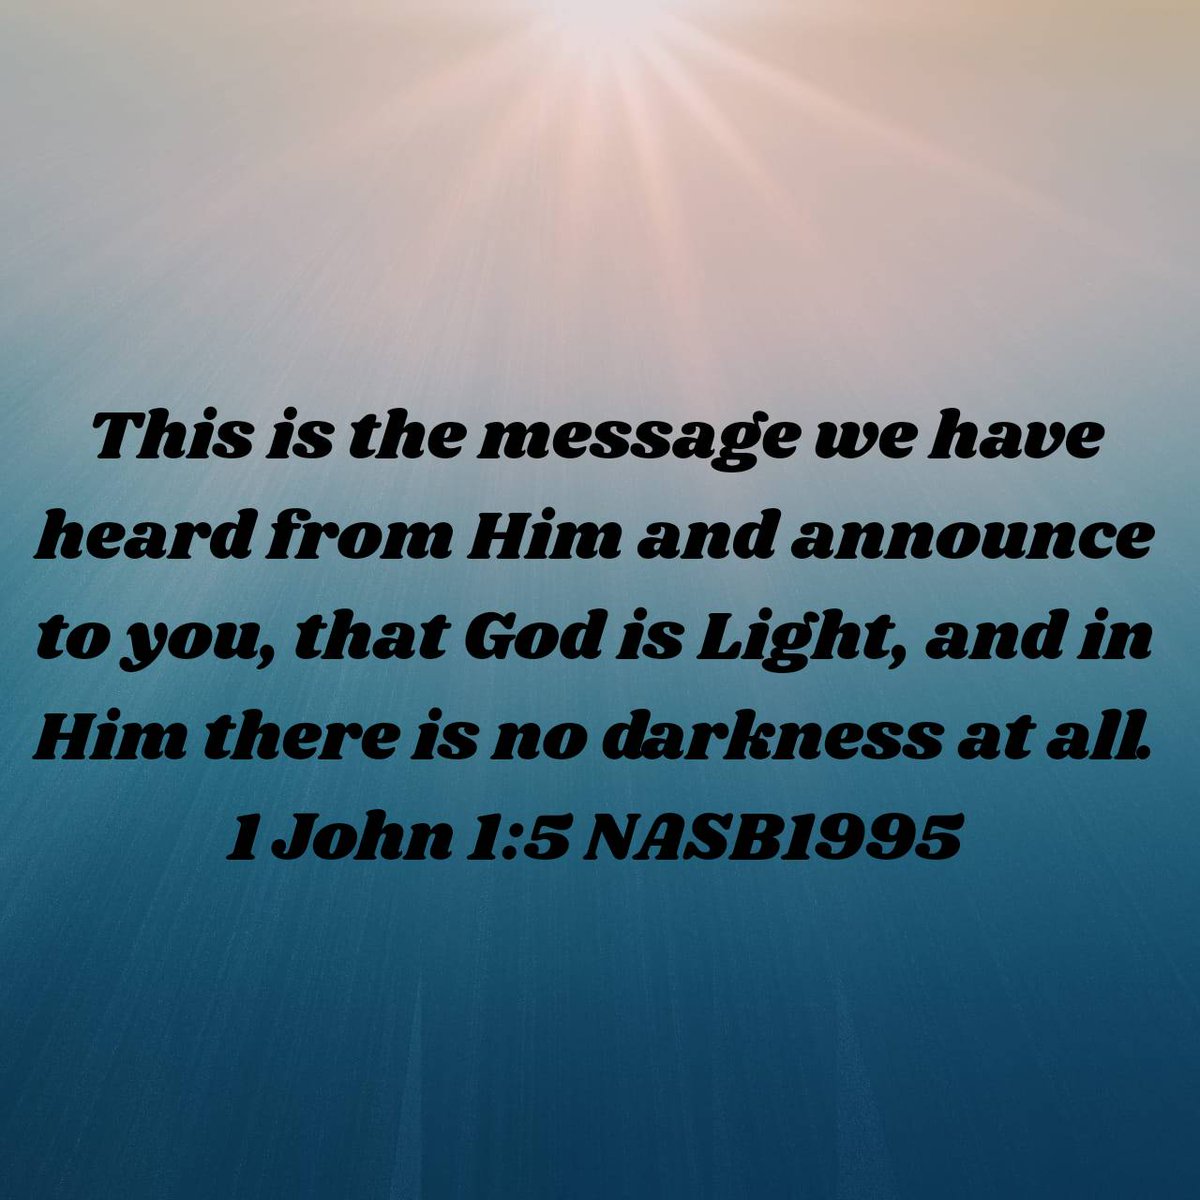 1 John 1:5 NASB1995 [5] This is the message we have heard from Him and announce to you, that God is Light, and in Him there is no darkness at all. bible.com/bible/100/1jn.…